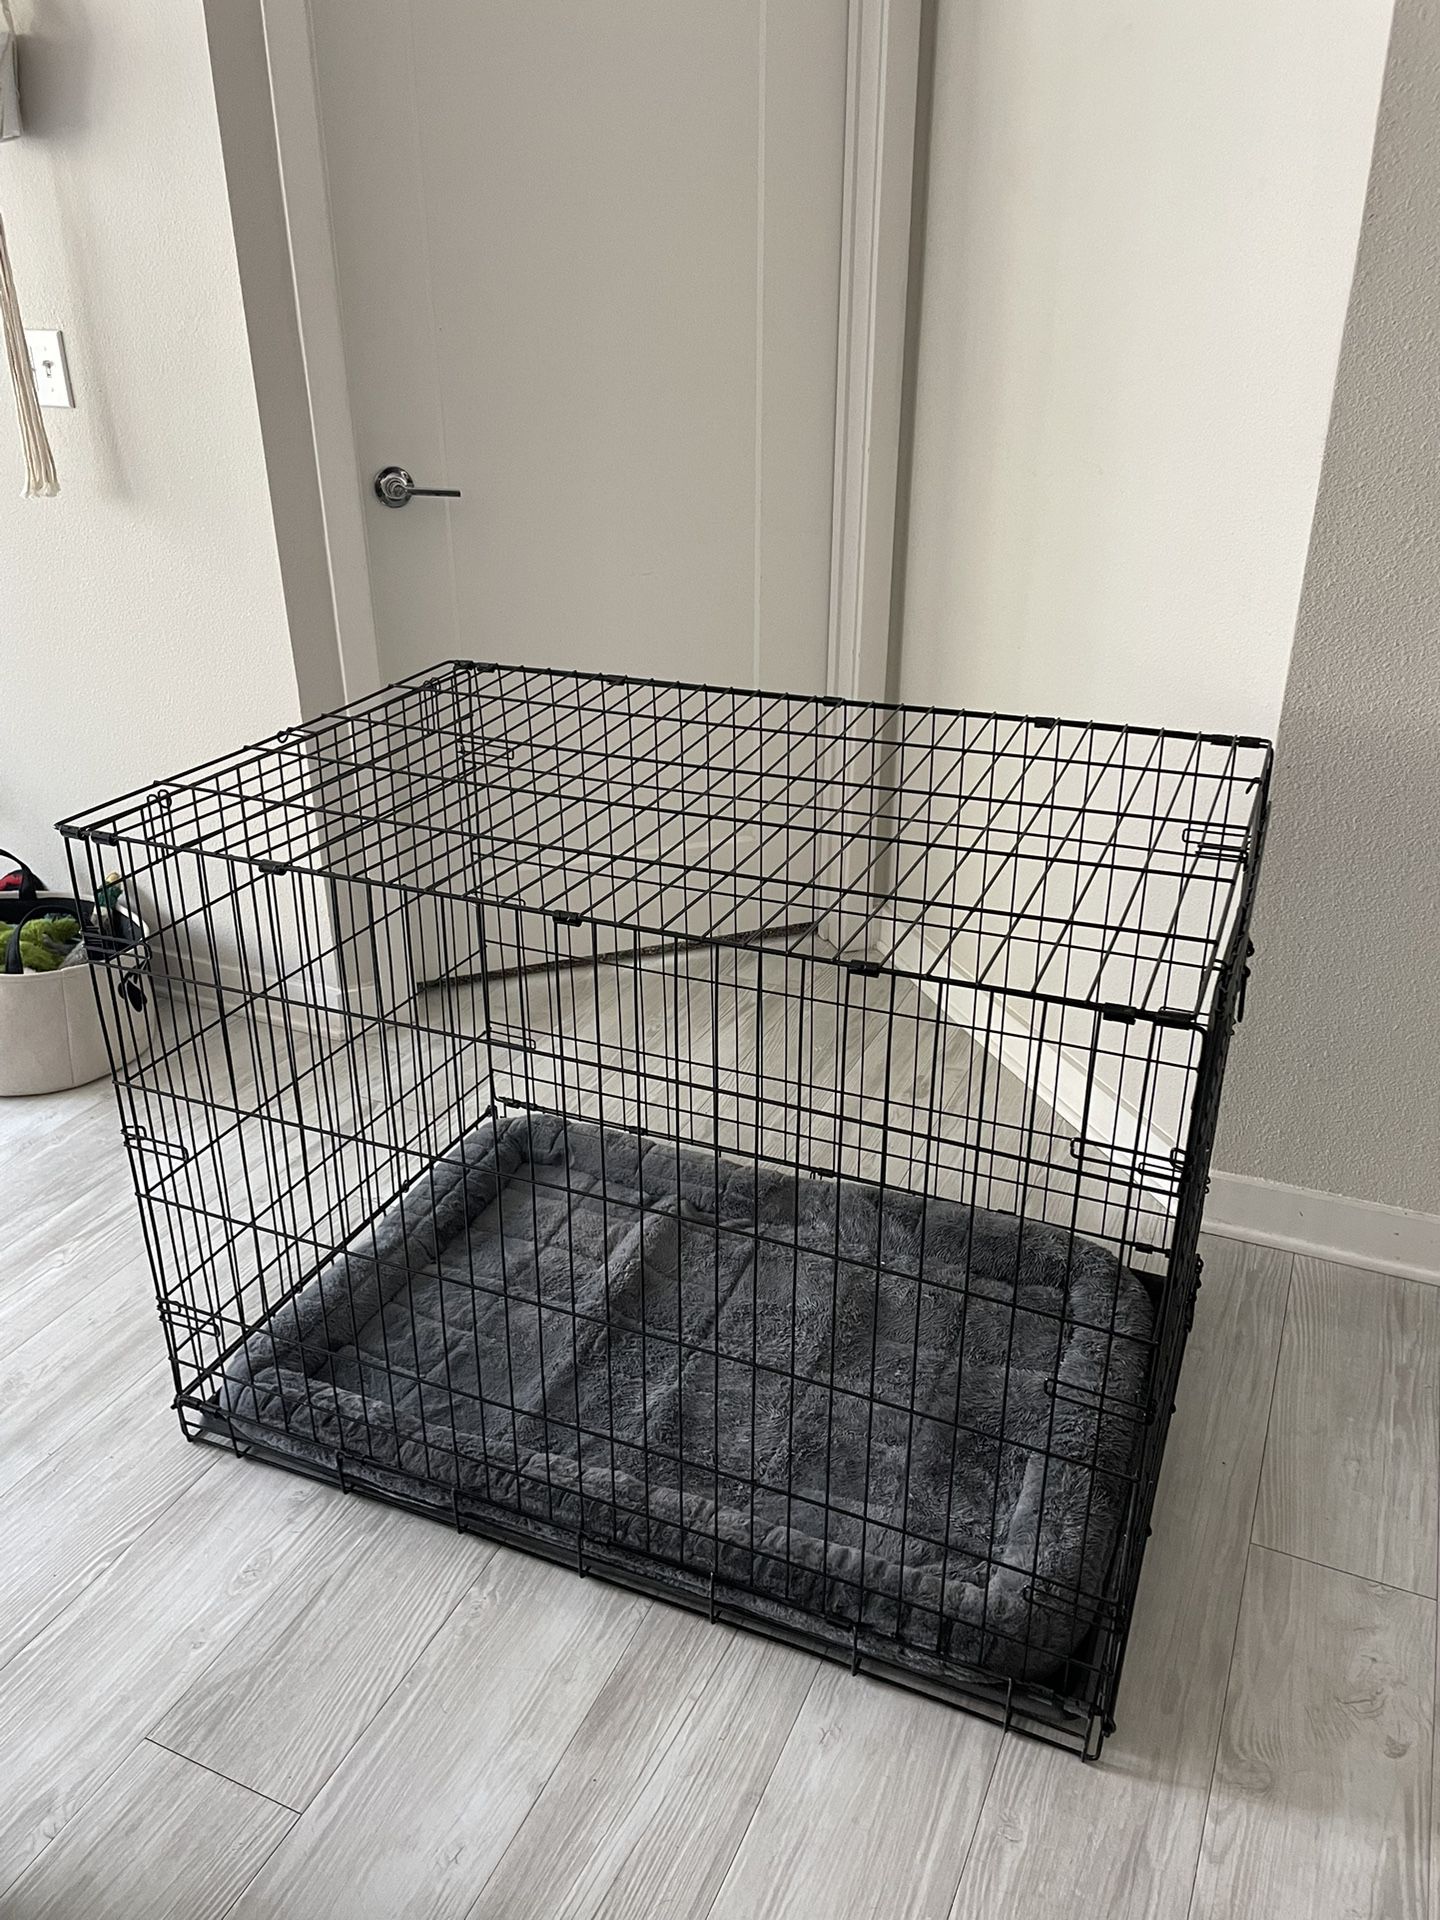 Brand New XL/L Dog Crate With Bed For Sale